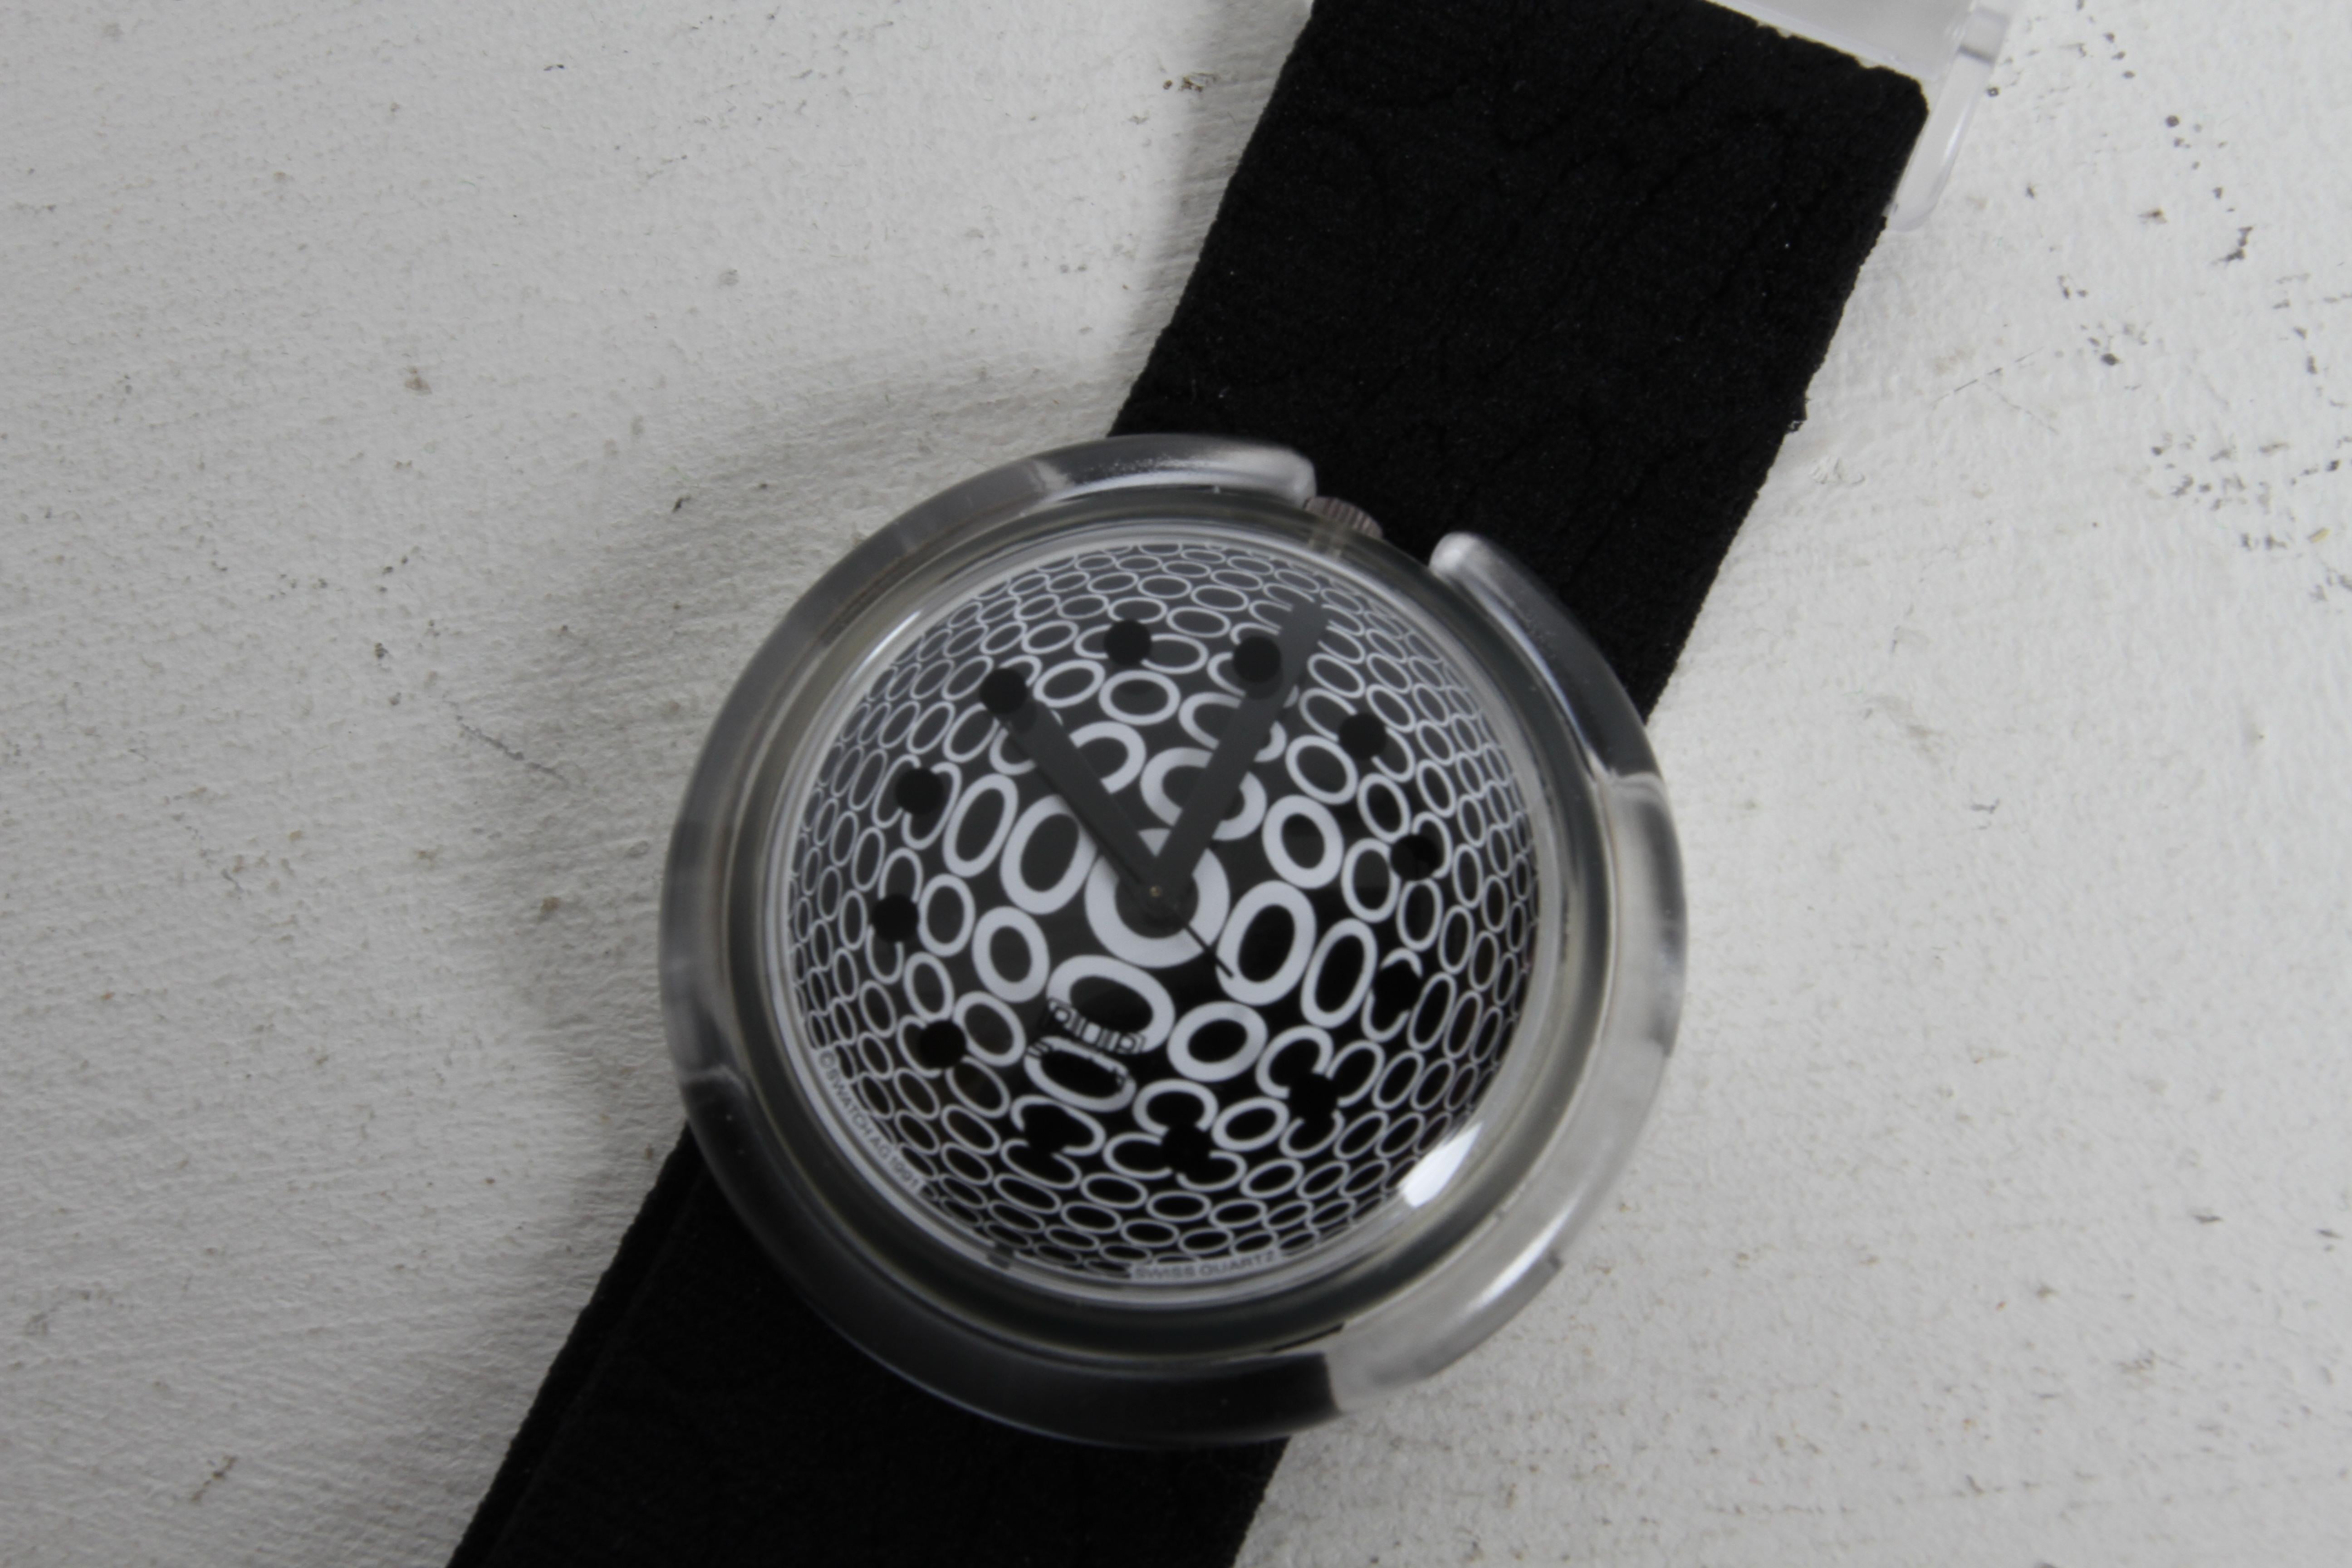 1992 Vintage POP Swatch Watch Special Dots - Op Art - Designed by Vasarely - NOS For Sale 6